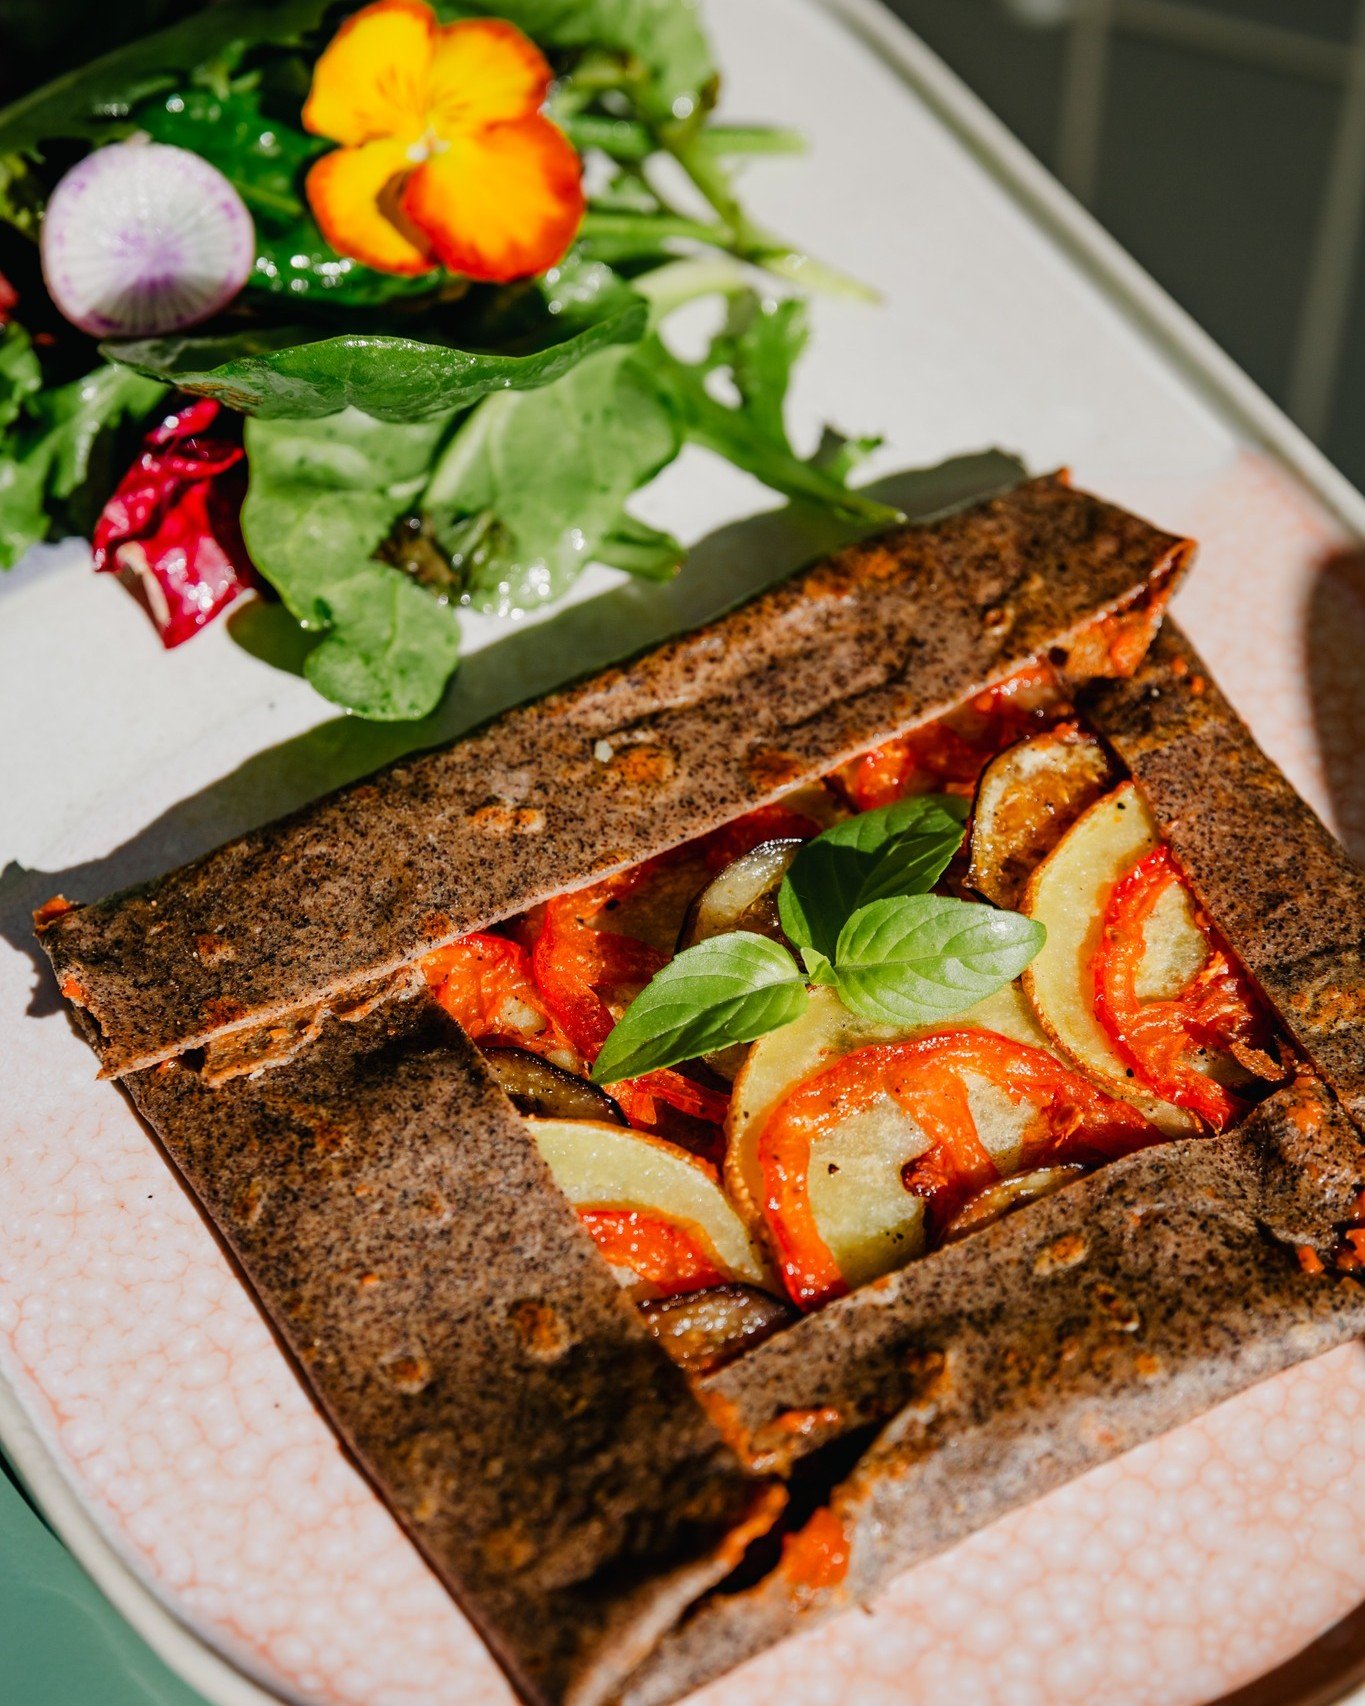 Our ratatouille galette is beginning to form a cult following. The fresh and flavorful tomato base topped with roasted vegetables on our buckwheat cr&ecirc;pe is a perfect summer-ready lunch.
Available at 11am!